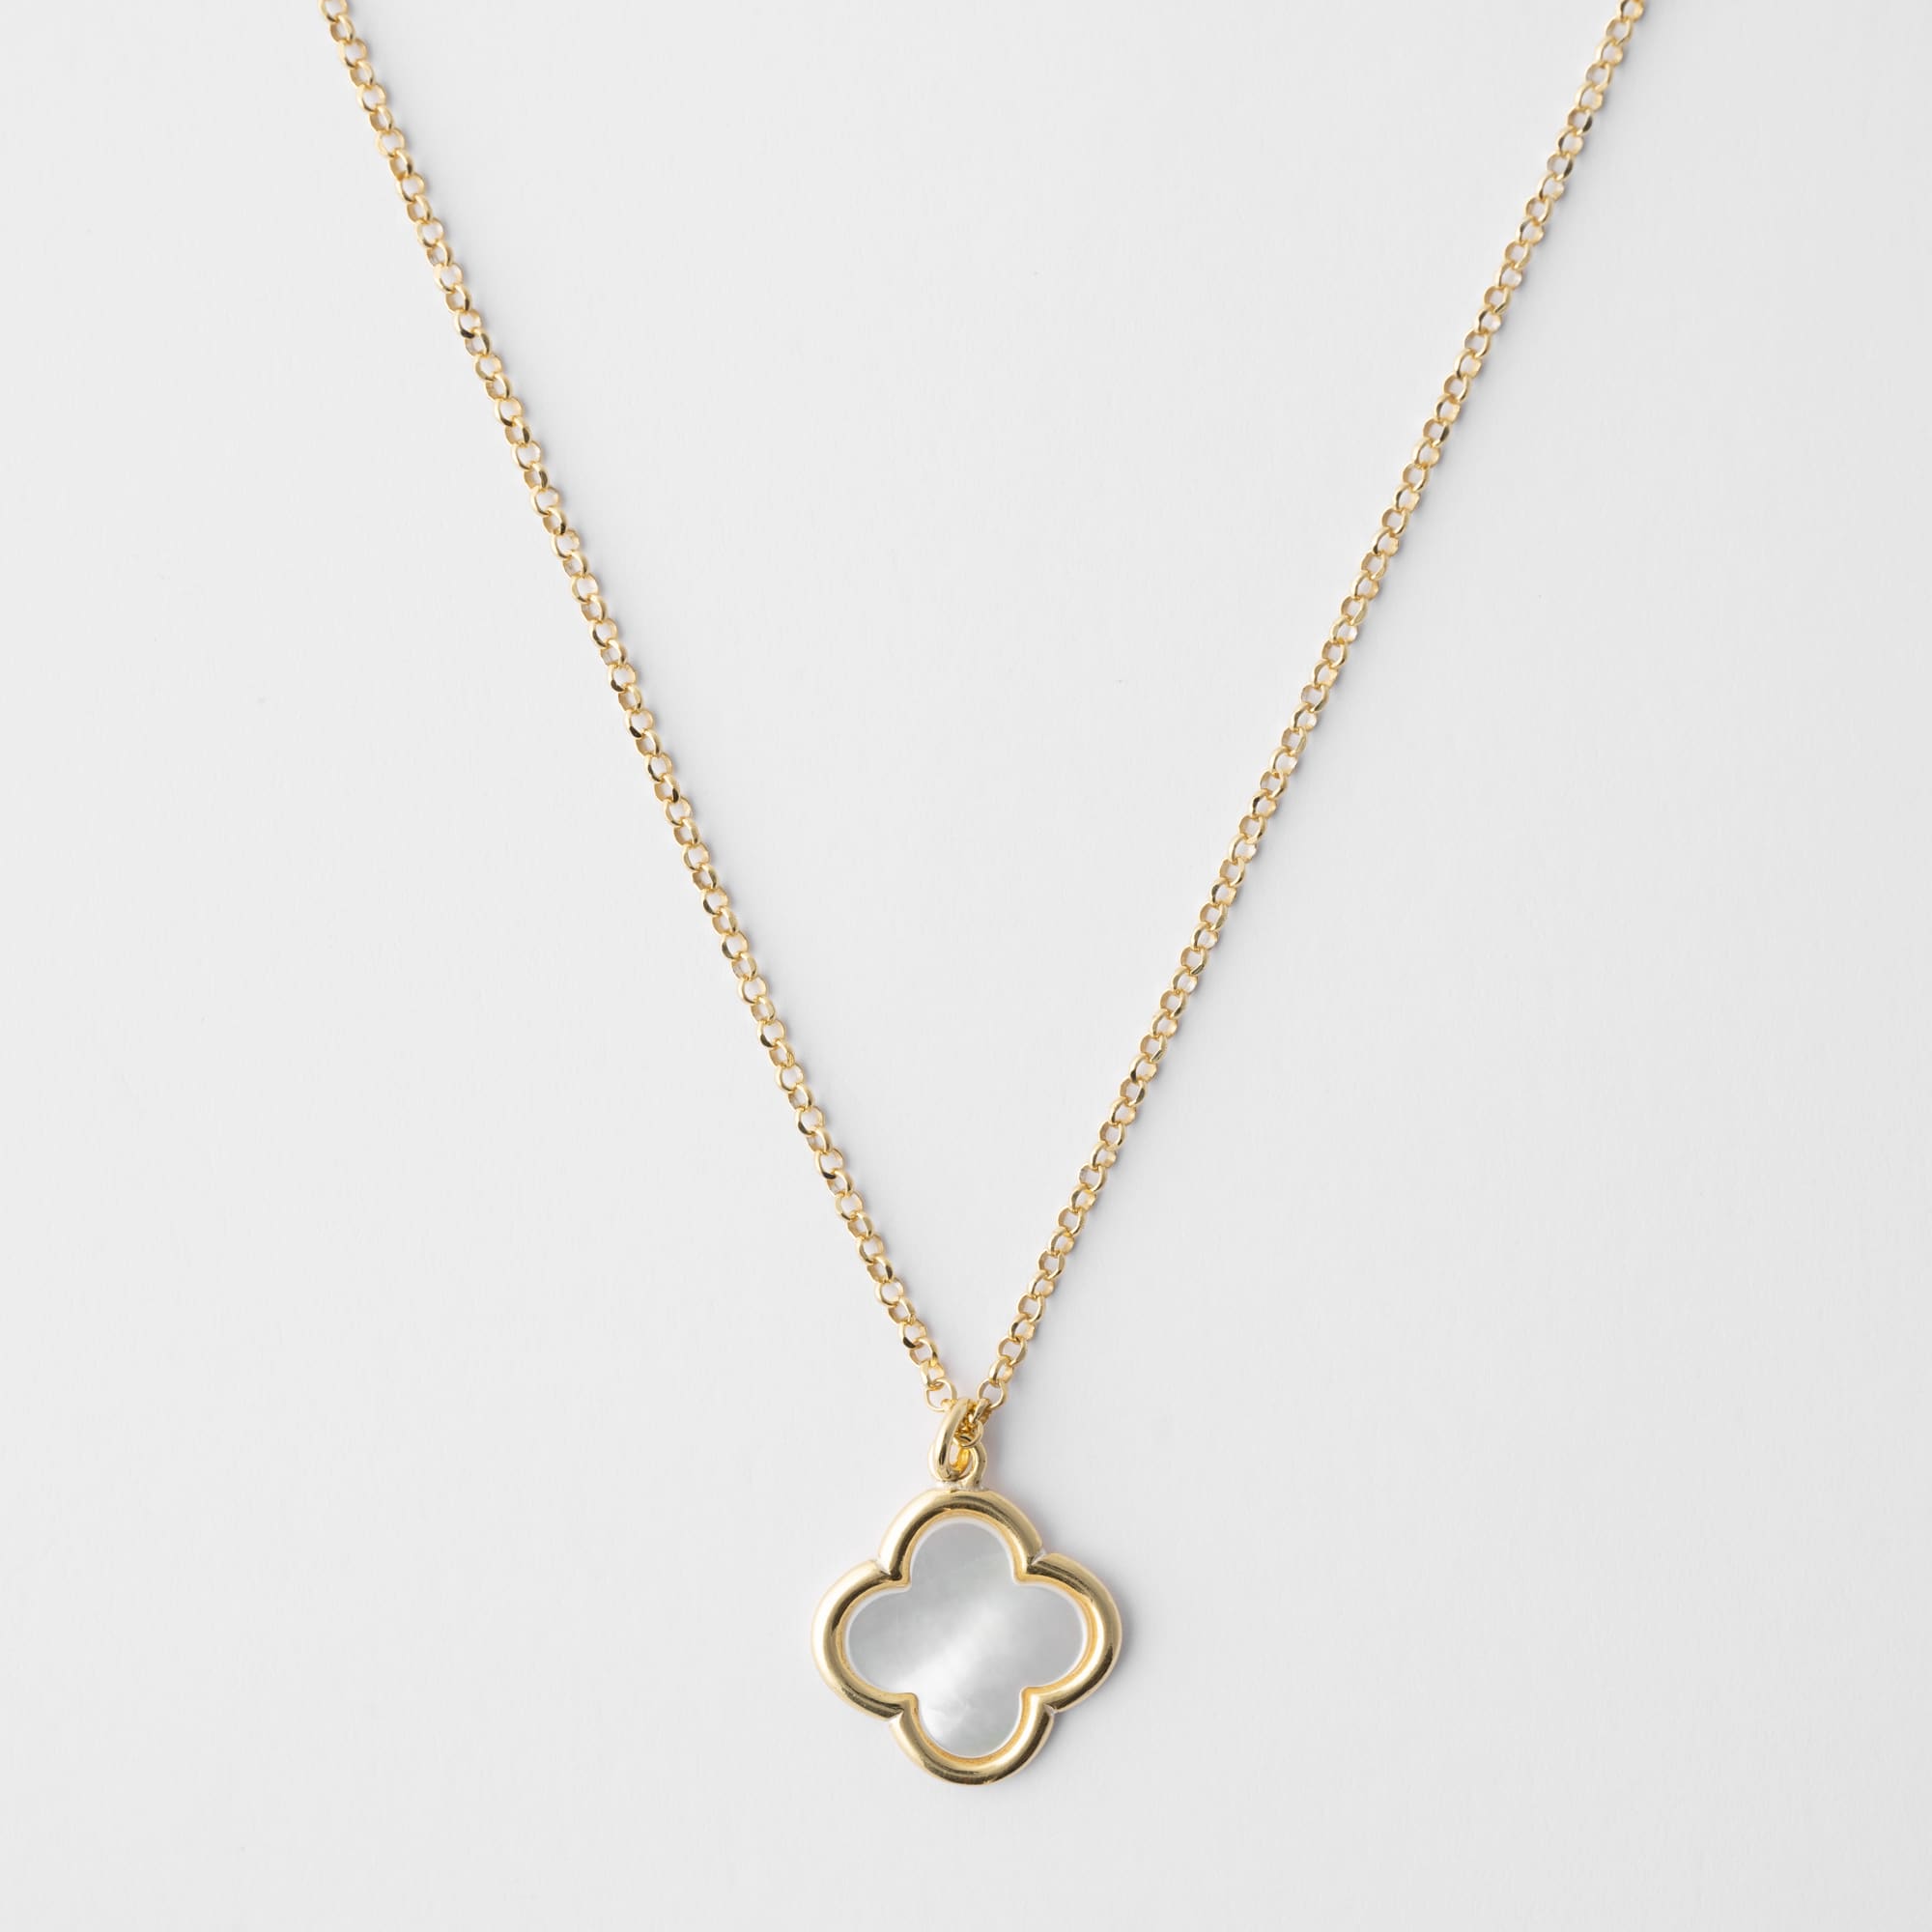 CLOVERLEAF Gold Necklace with Mother of Pearl